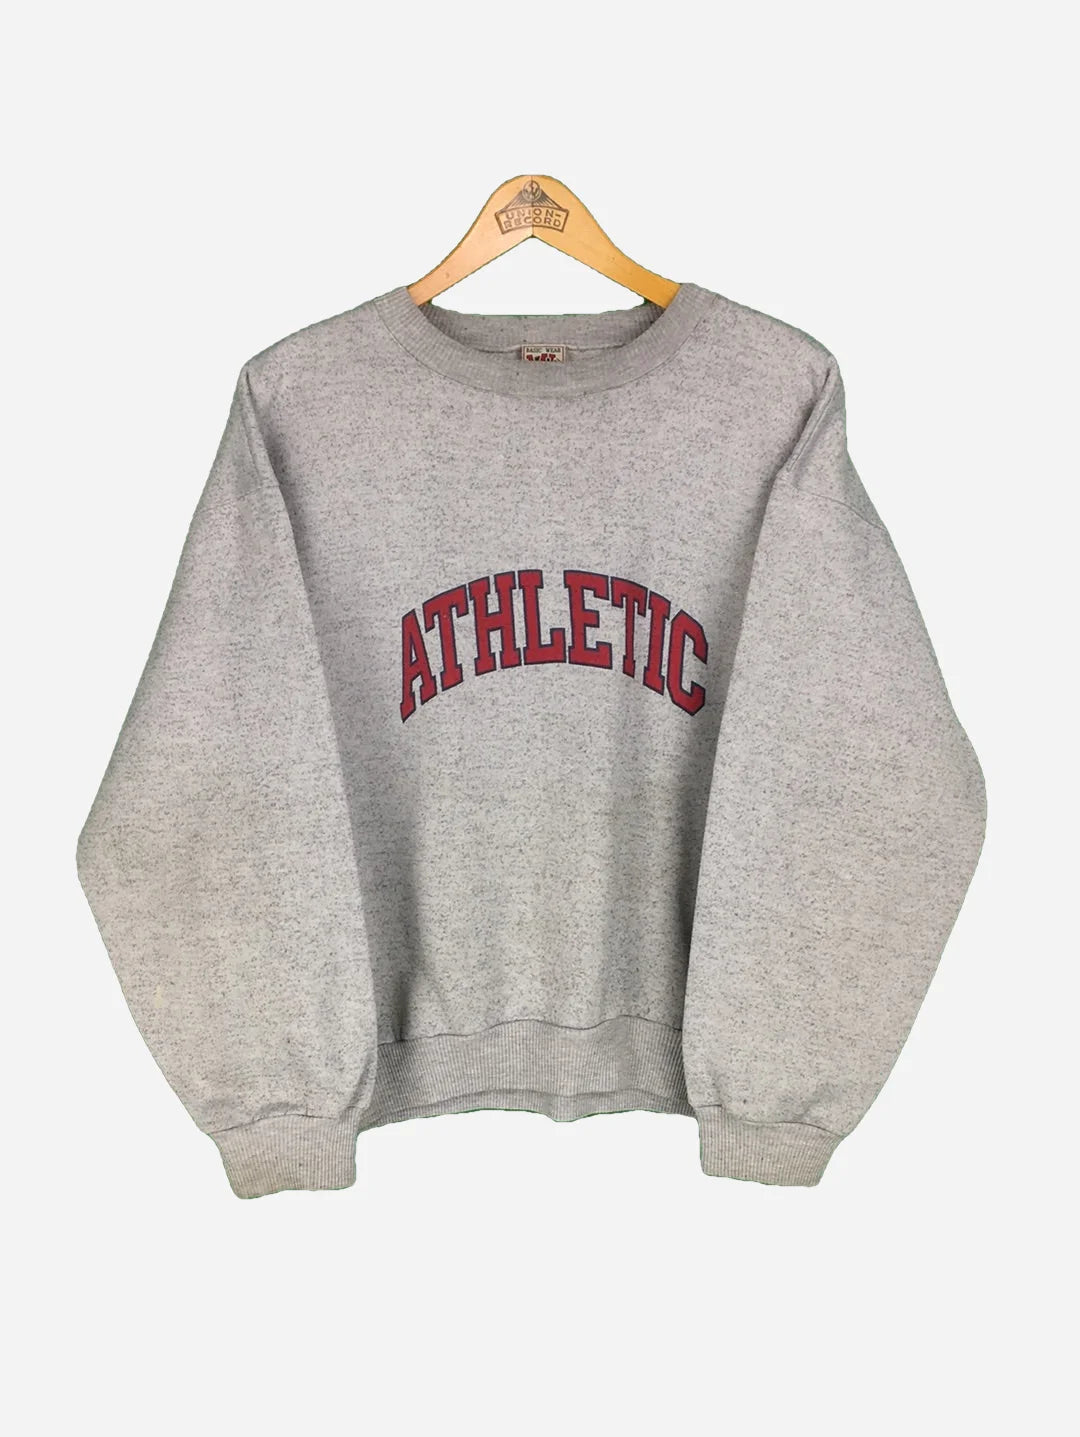 „Athletic“ Sweater (S)